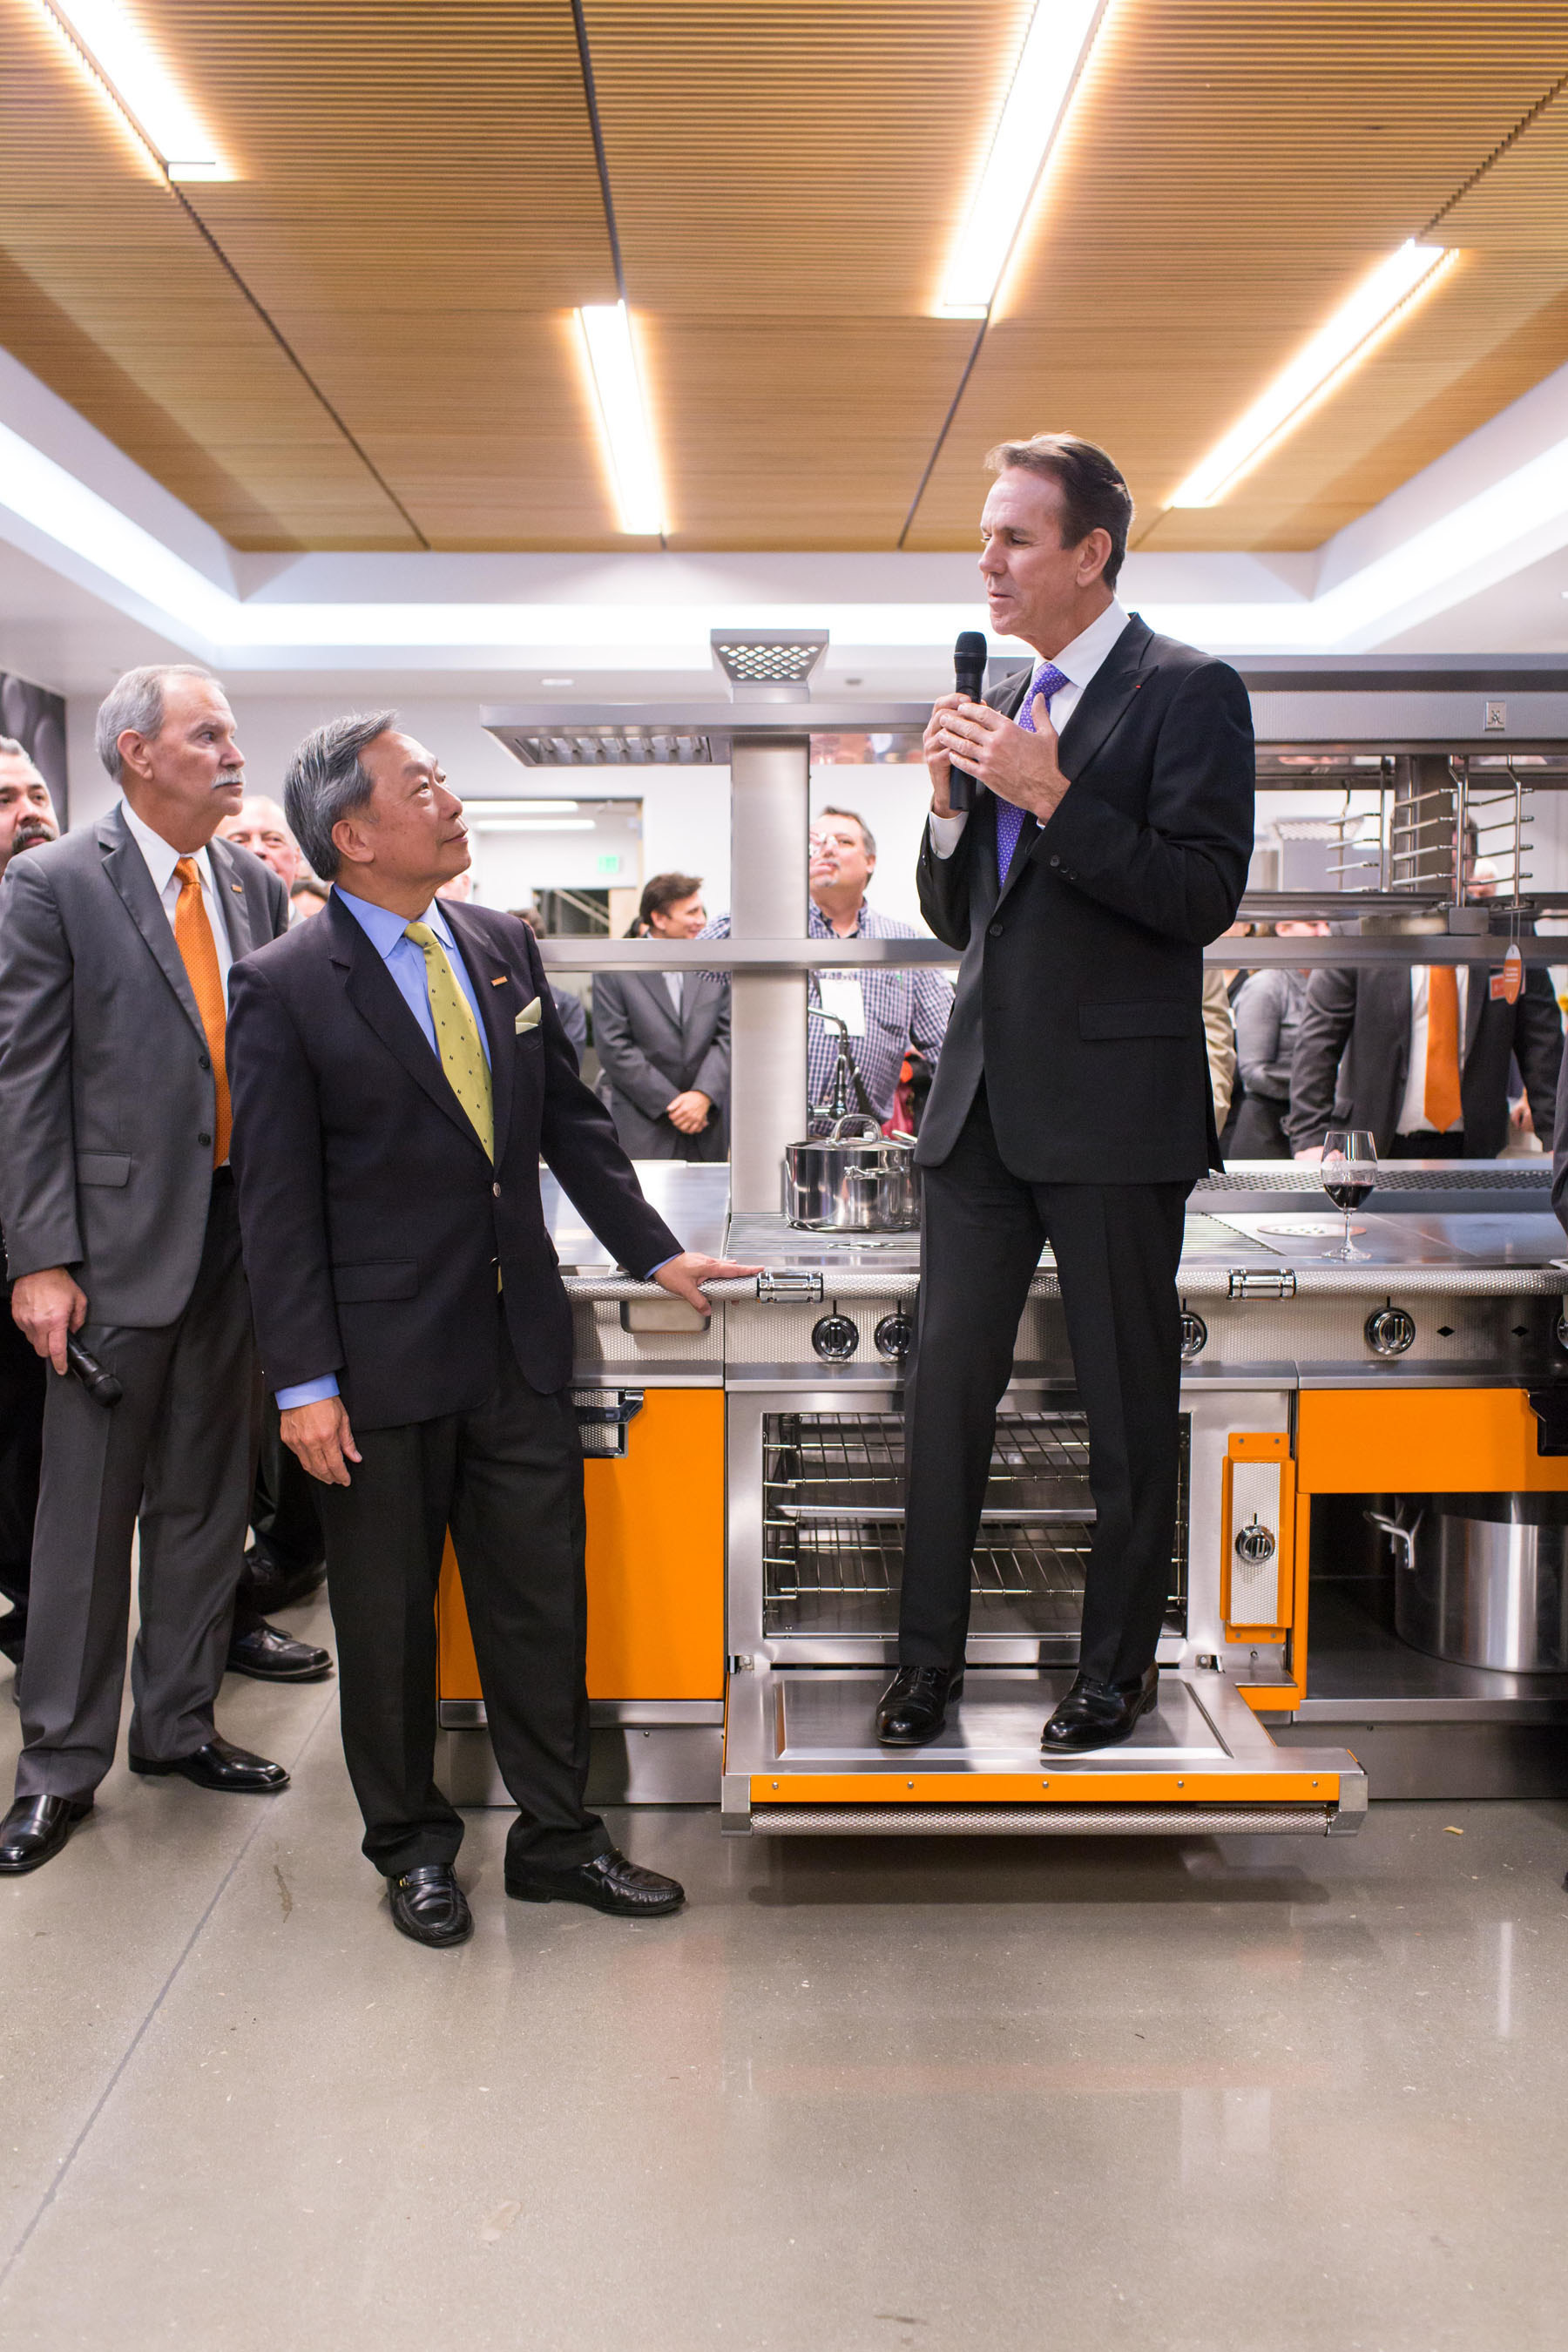 Chef Thomas Keller makes a toast to Stanley Cheng while testing the strength of the latest Hestan Commercial island suite.